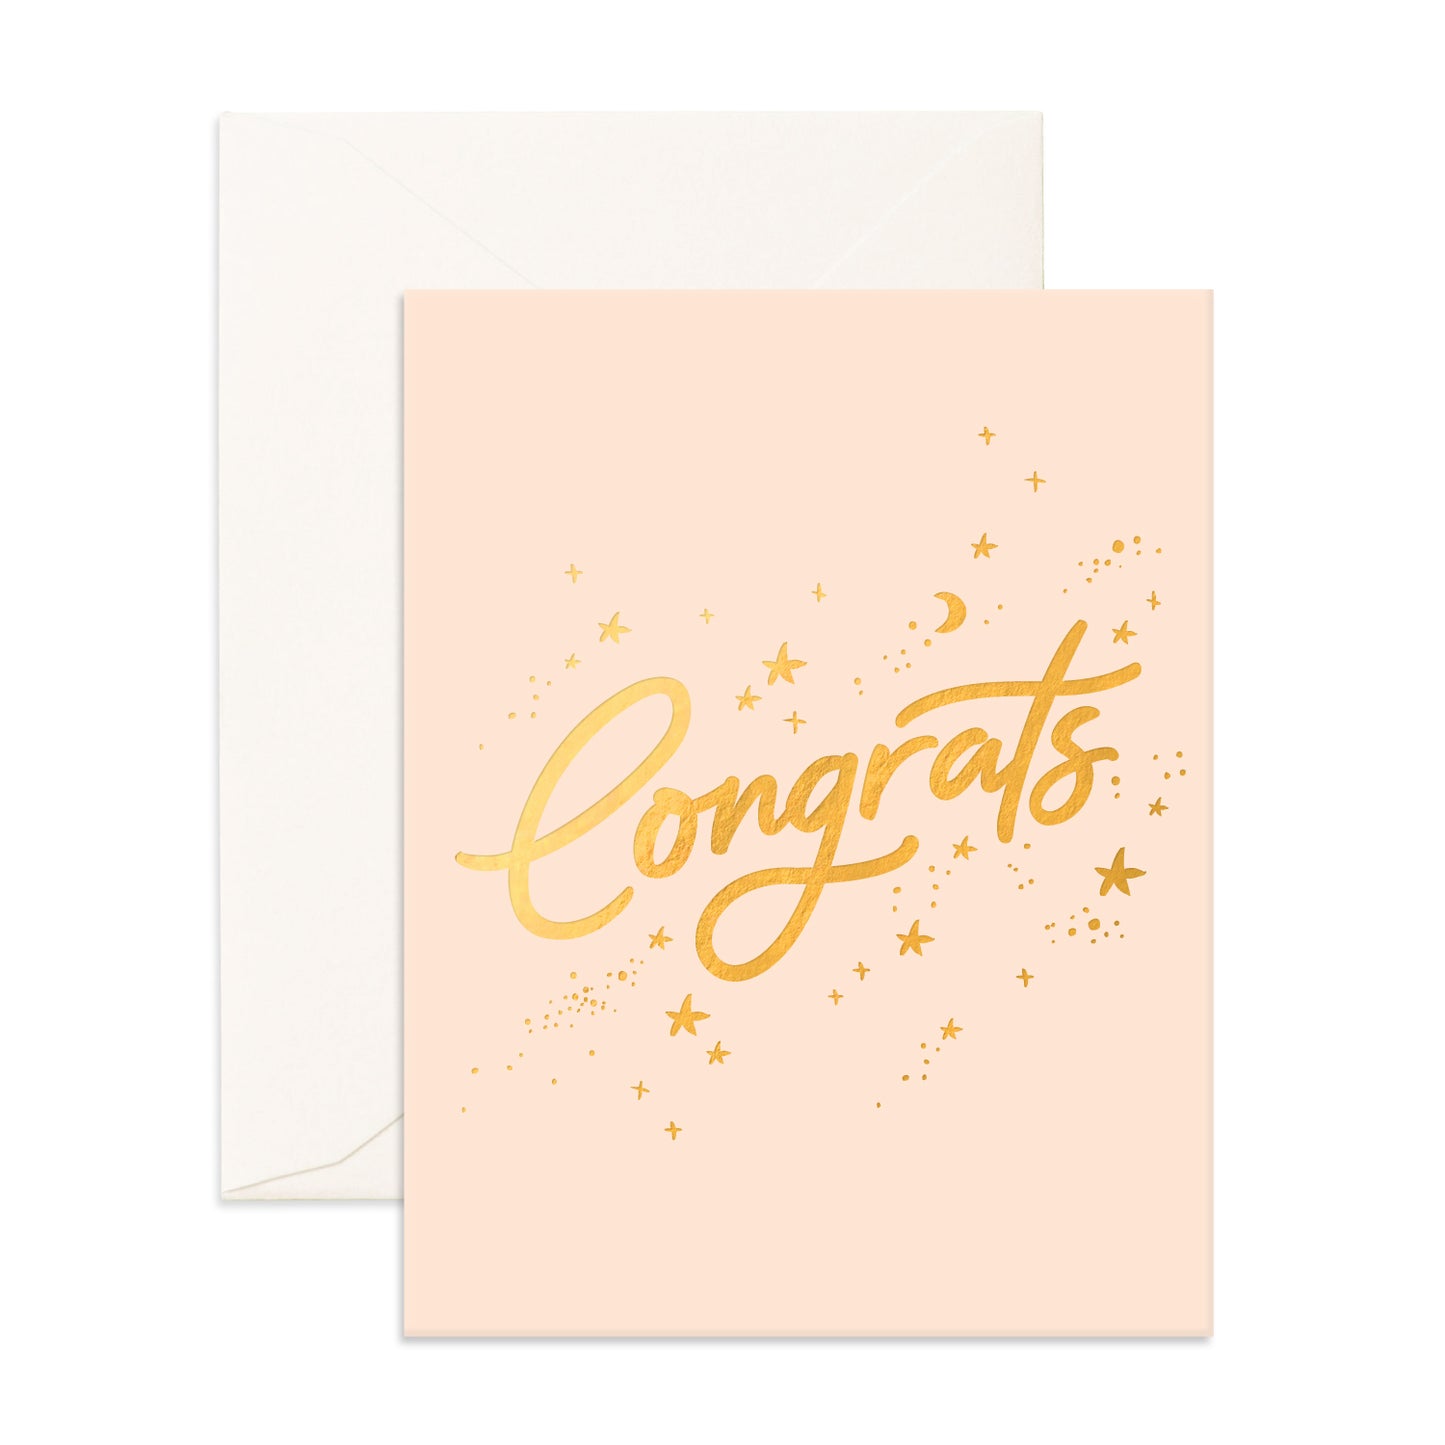 Congrats Greeting Card - Stars - Little Reef and Friends